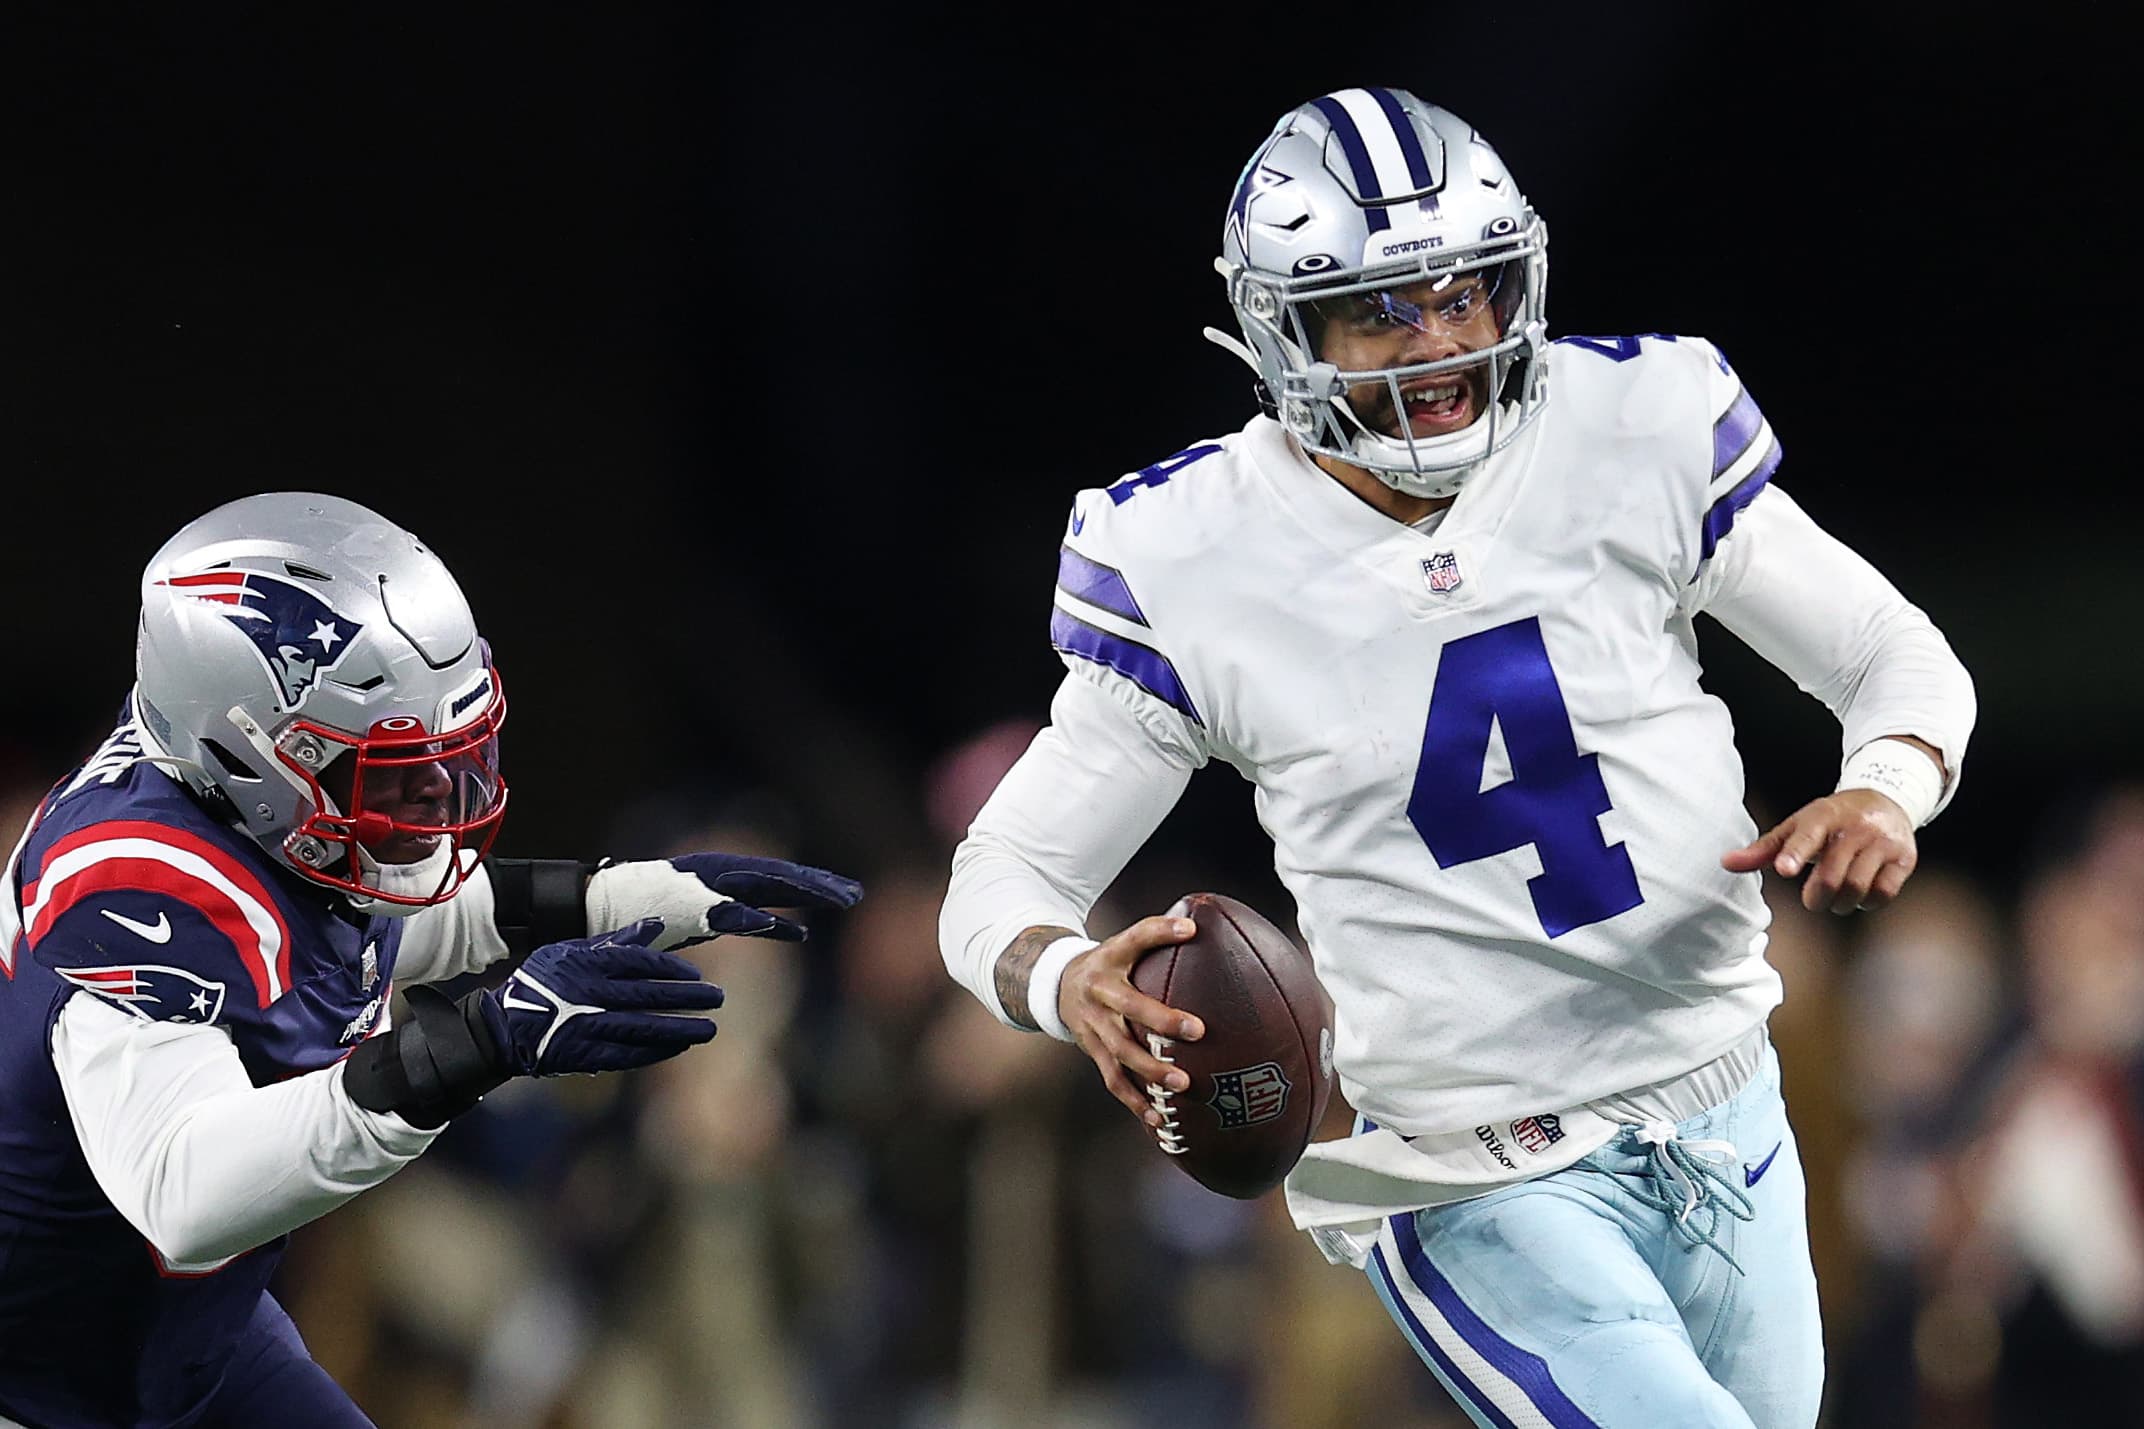 The Dallas Cowboys are back and fans of 'America's Team' are elated